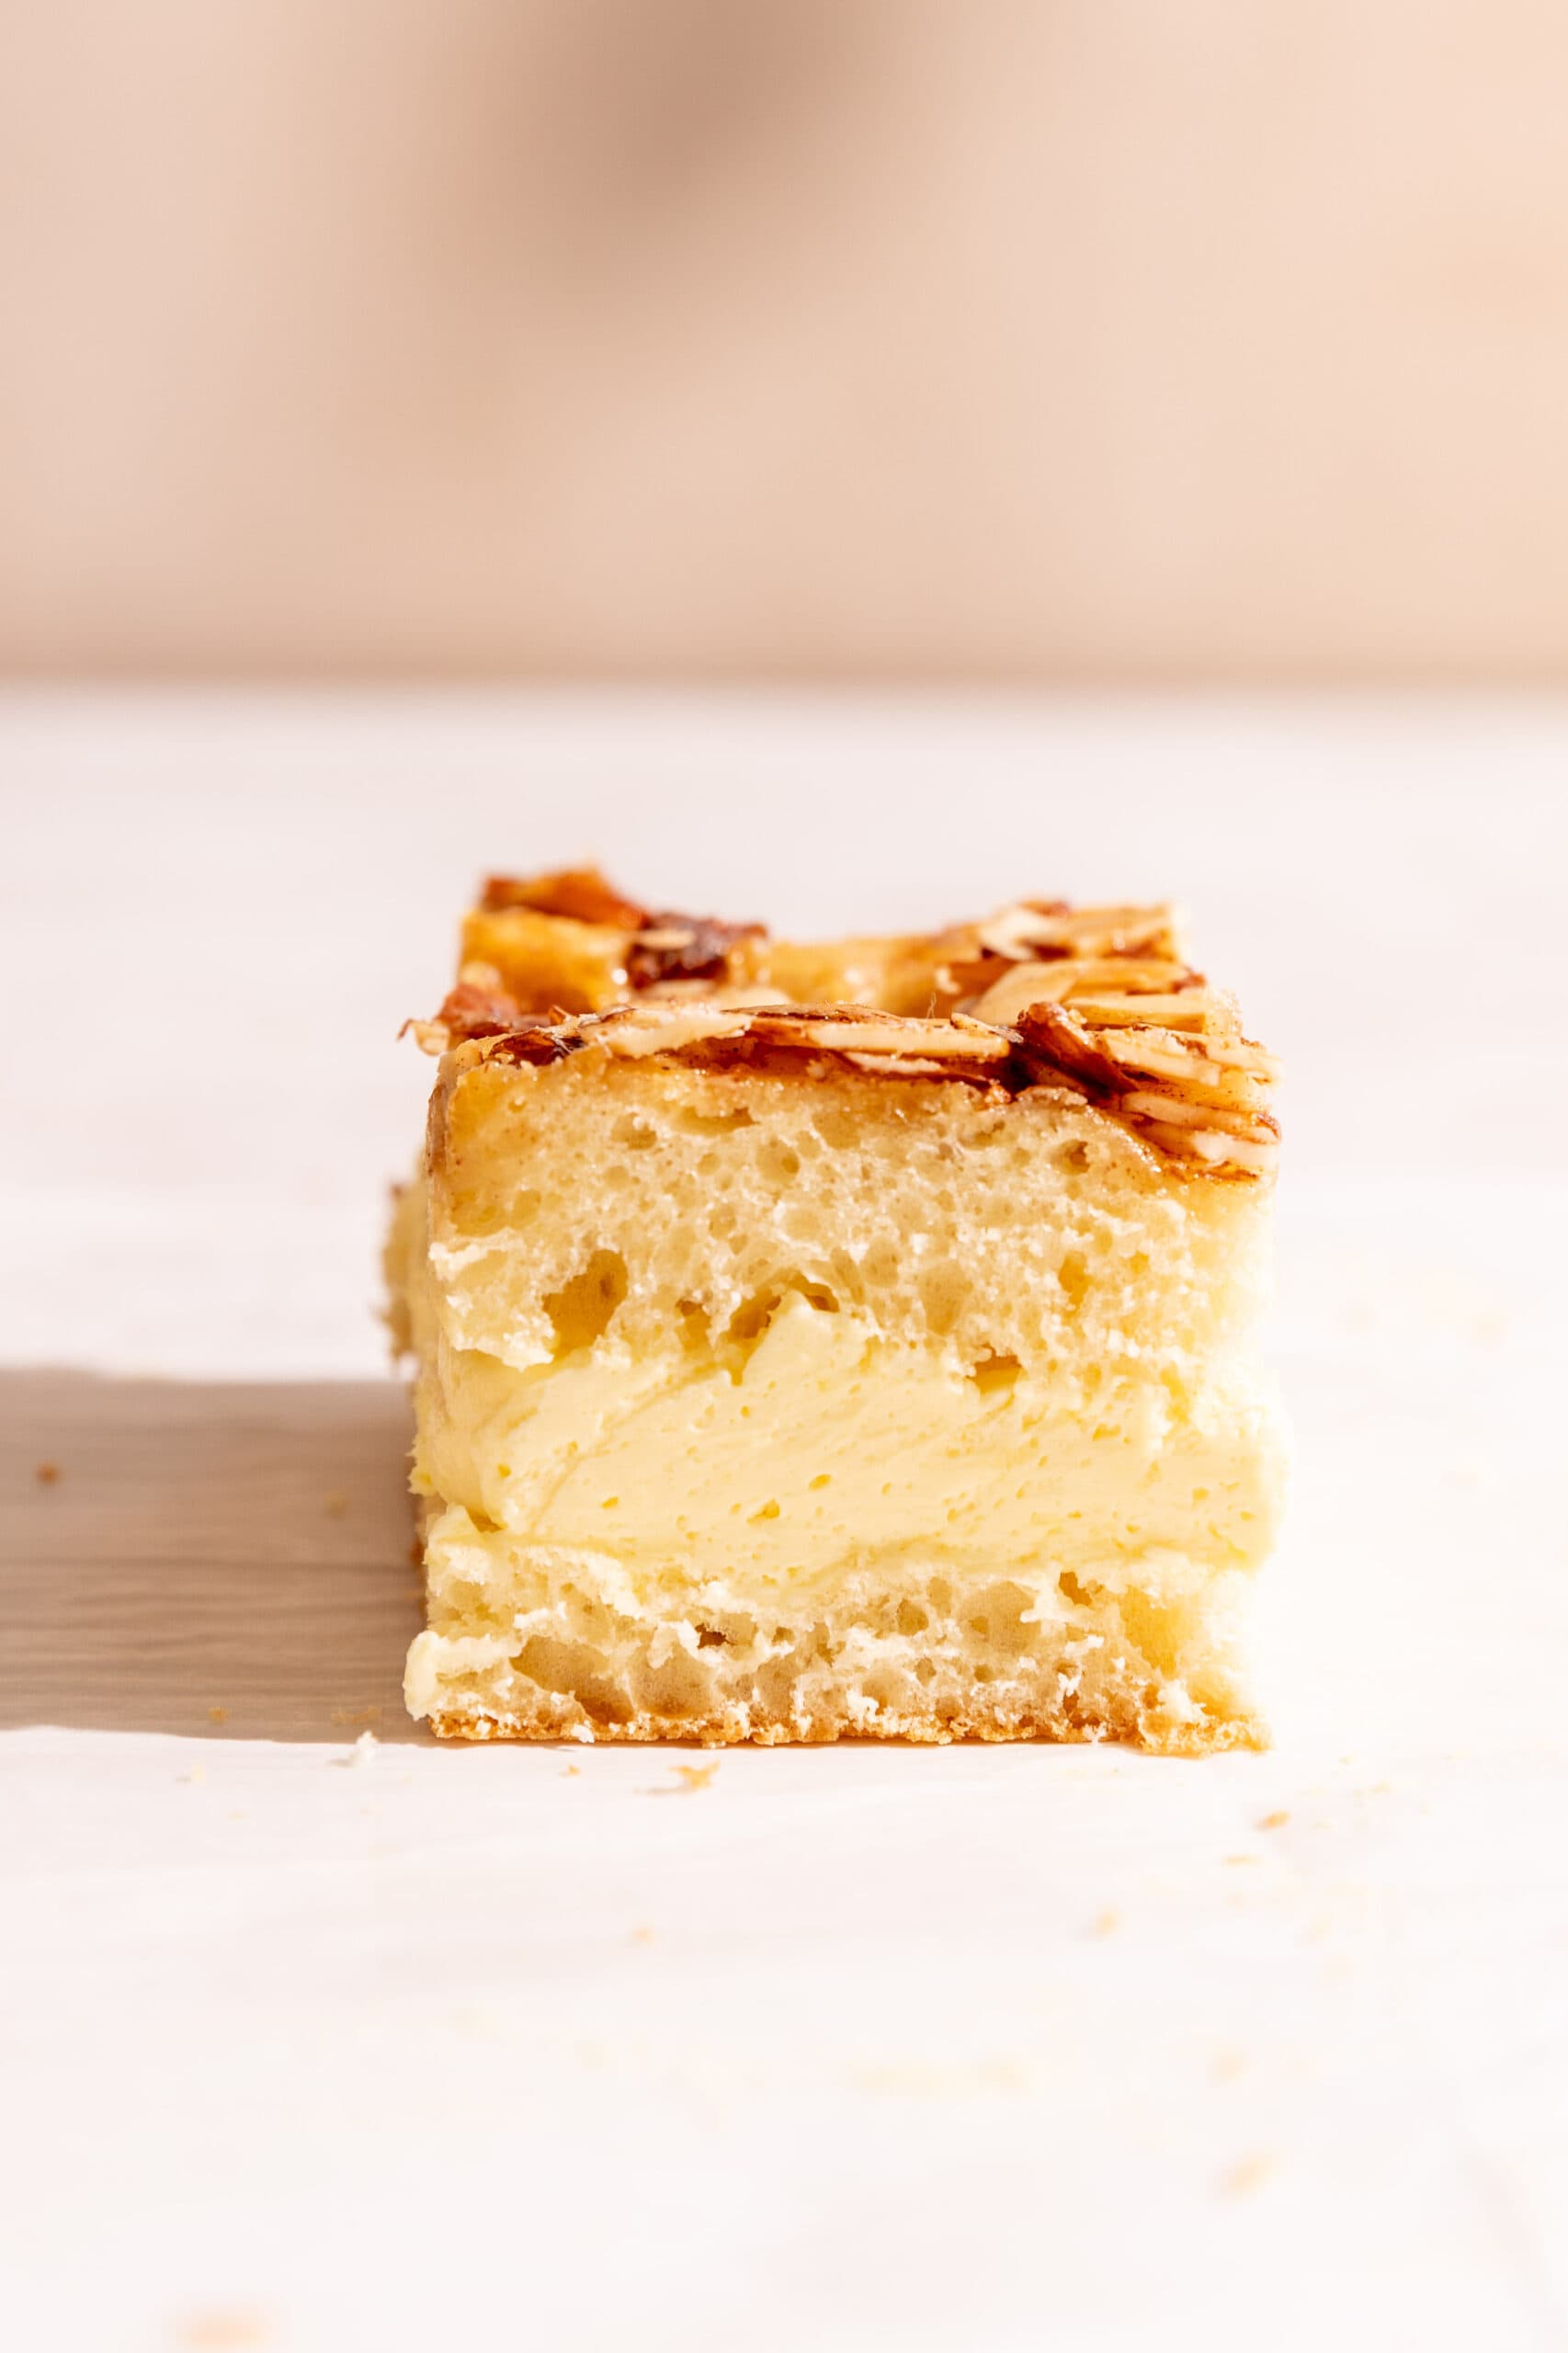 Side view of a slice of Classic German Bee Sting cake showing both the honey almond topping, the yeasted cake, and the creamy vanilla filling.